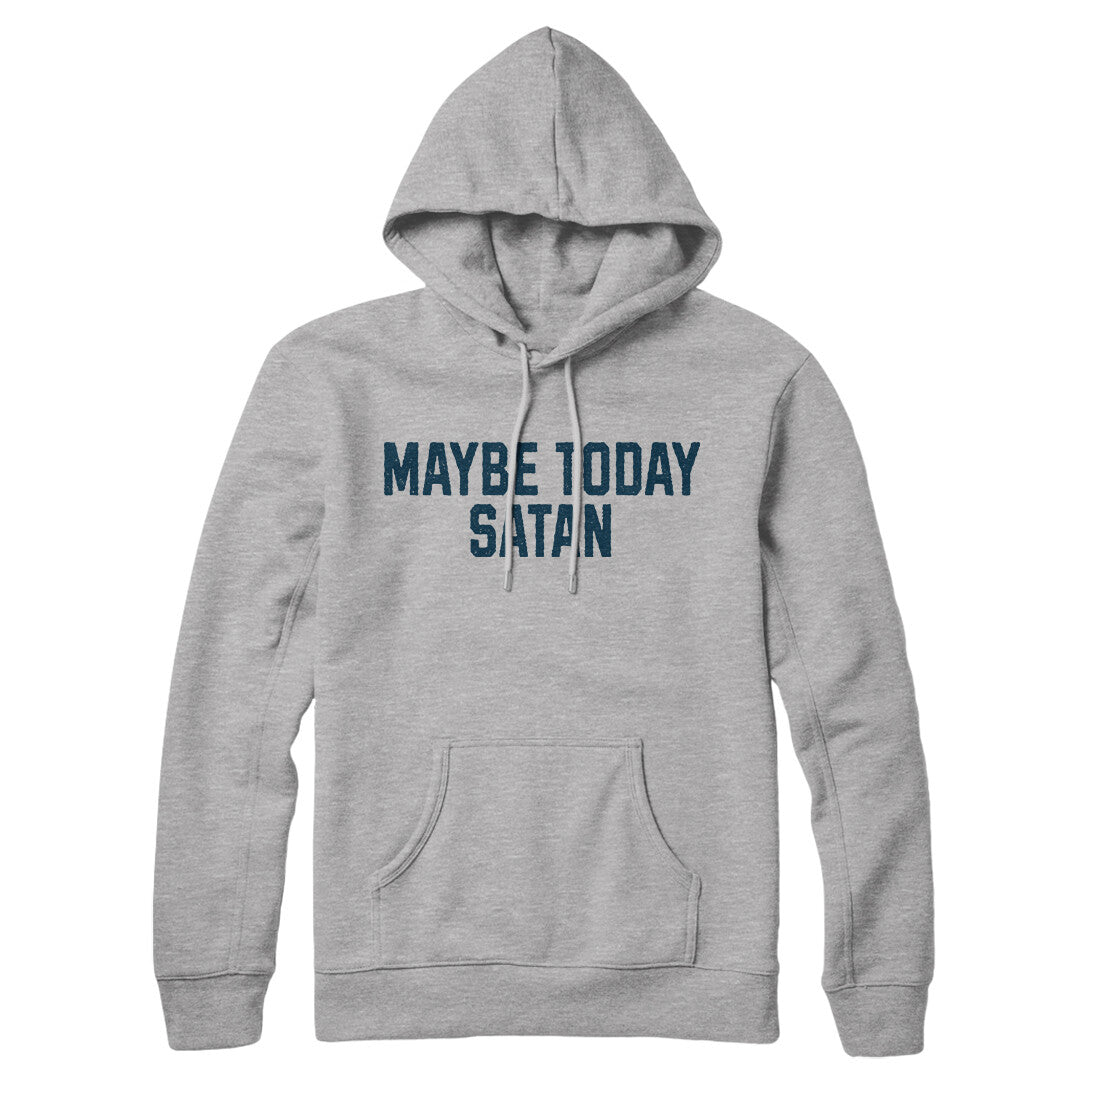 Maybe Today Satan in Heather Grey Color